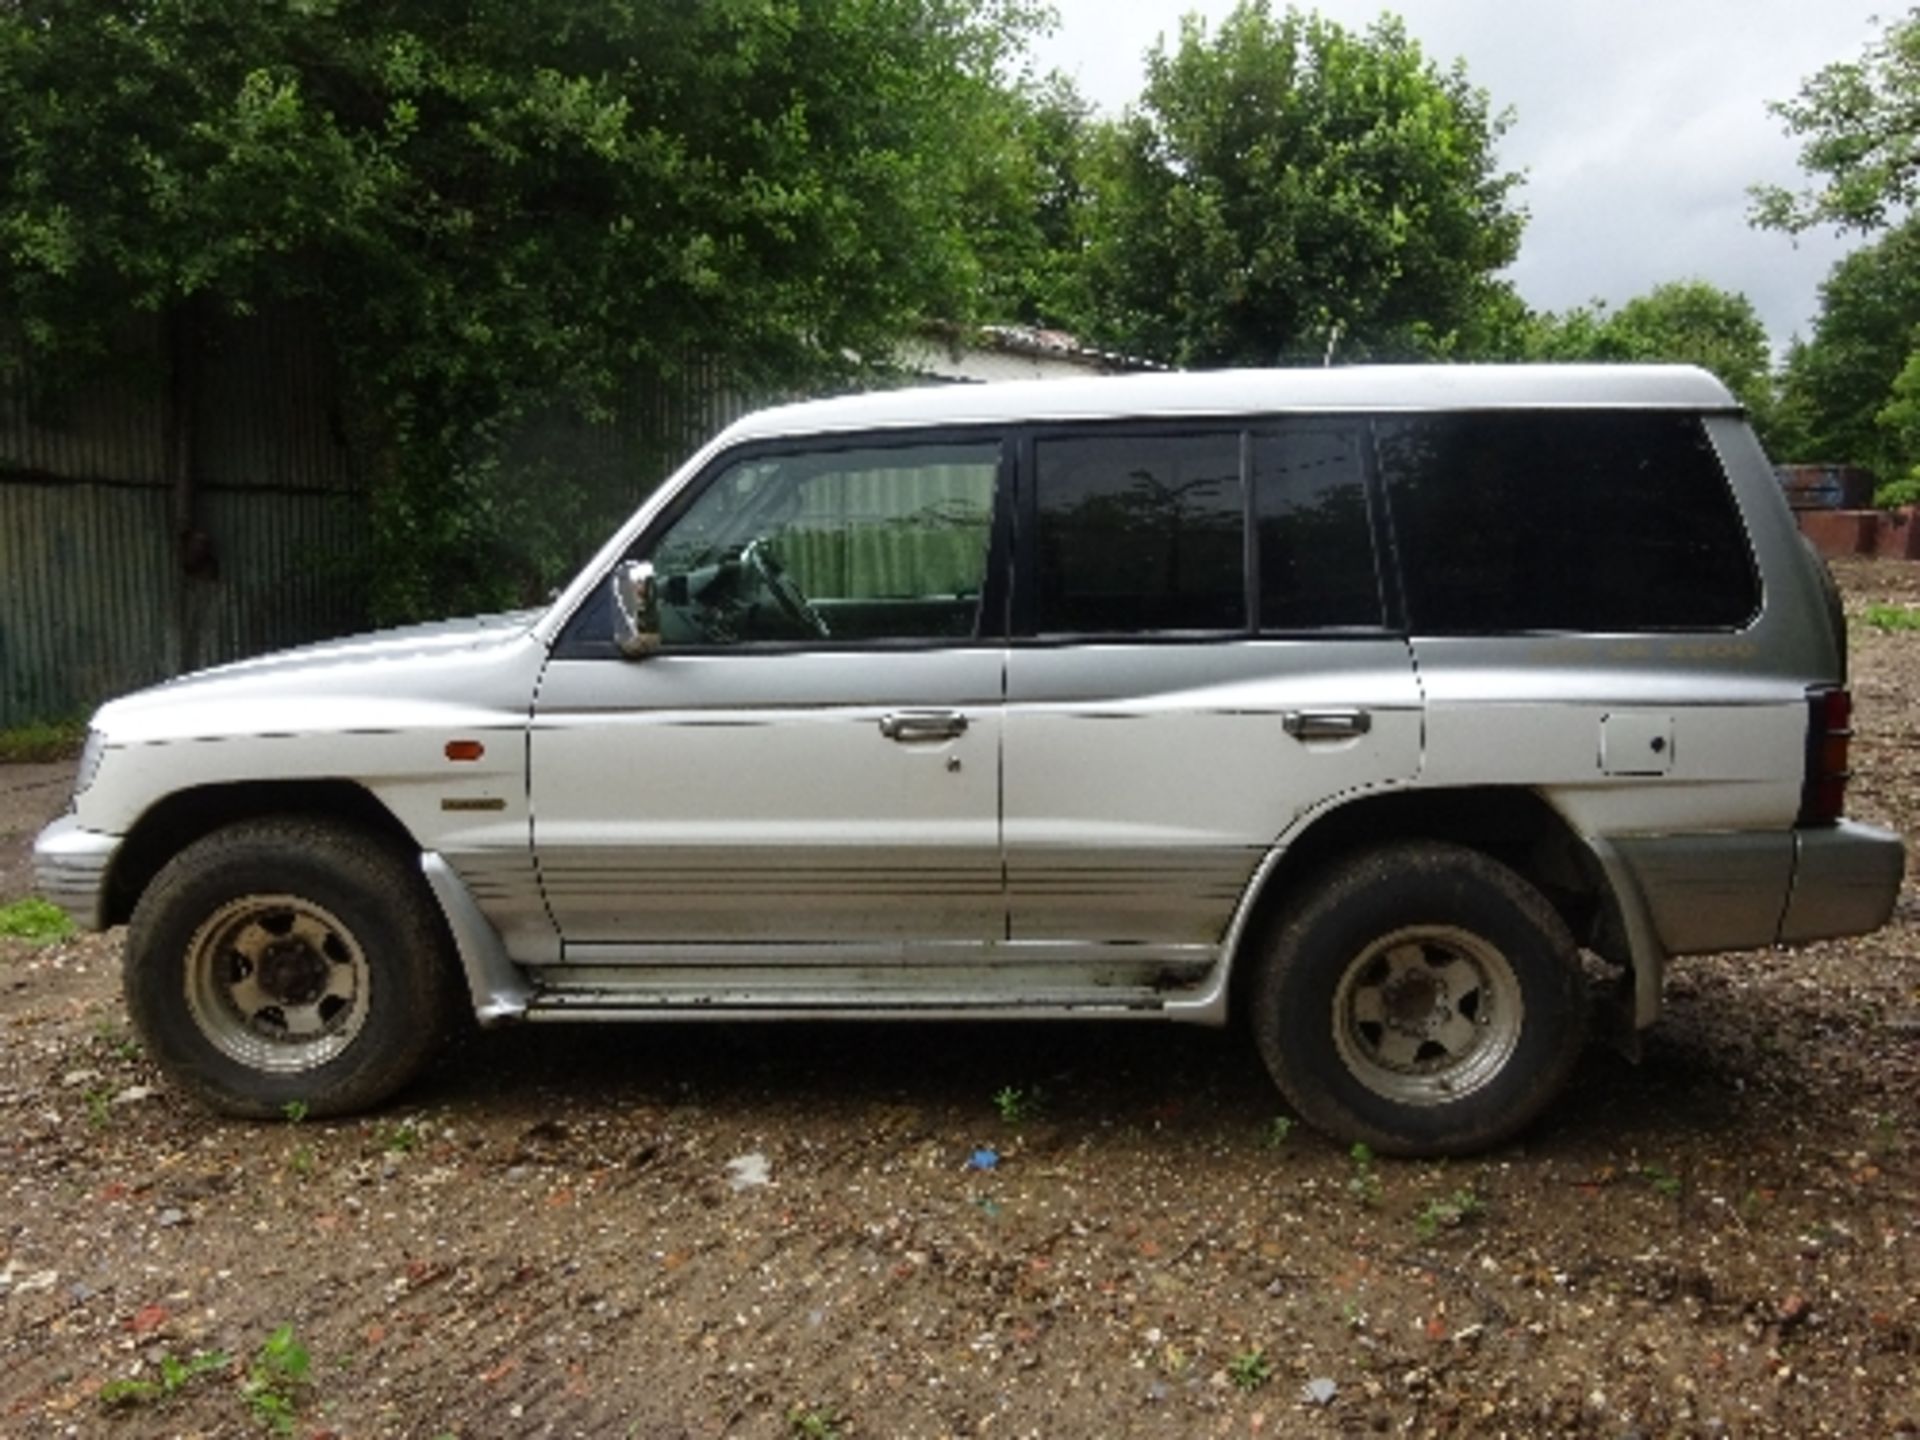 Mitsubishi Shogun GDI V6 3500 Registration No: S406 KDYDeclared date of manufacture 1998 First - Image 2 of 4